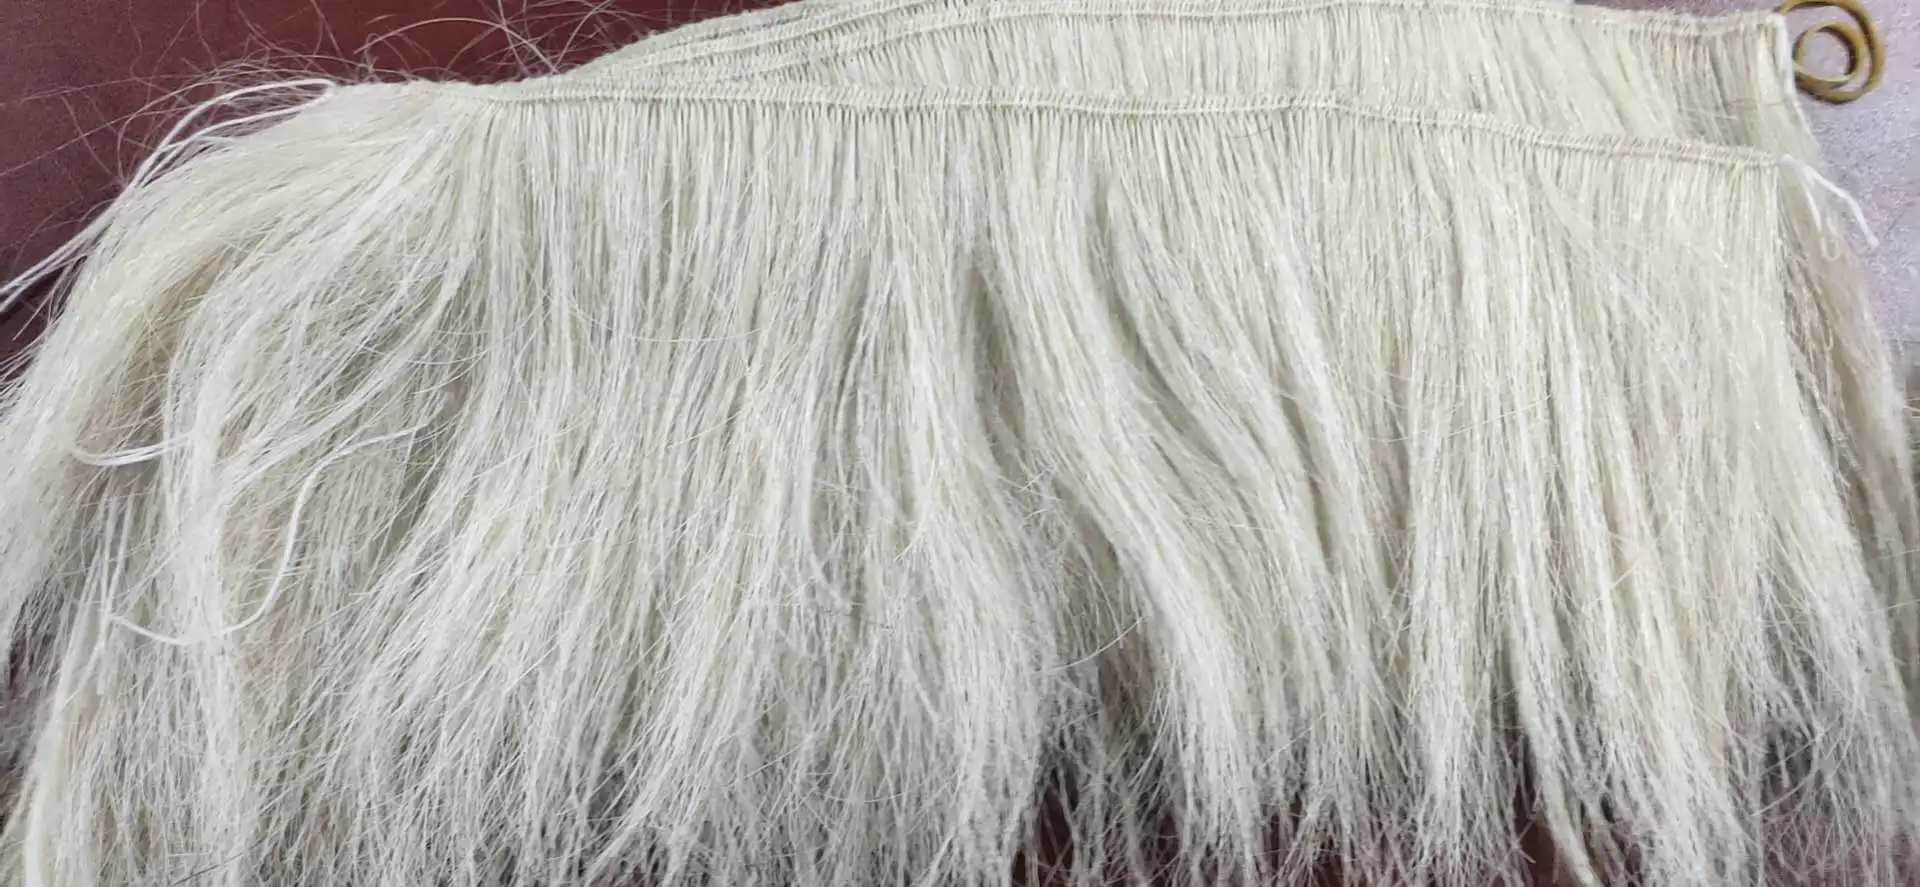 Aishili Full Hand-made Barrister Wigs Lawyer Wig With Horse Hair Judge Wig  For Formal Use In Court And Costume - Buy Hand Made Lawyer Wig Horse Hair  For Formal Use In Court And Costume,Barrister Wig Horse Hair For Formal Use  In Court And ...